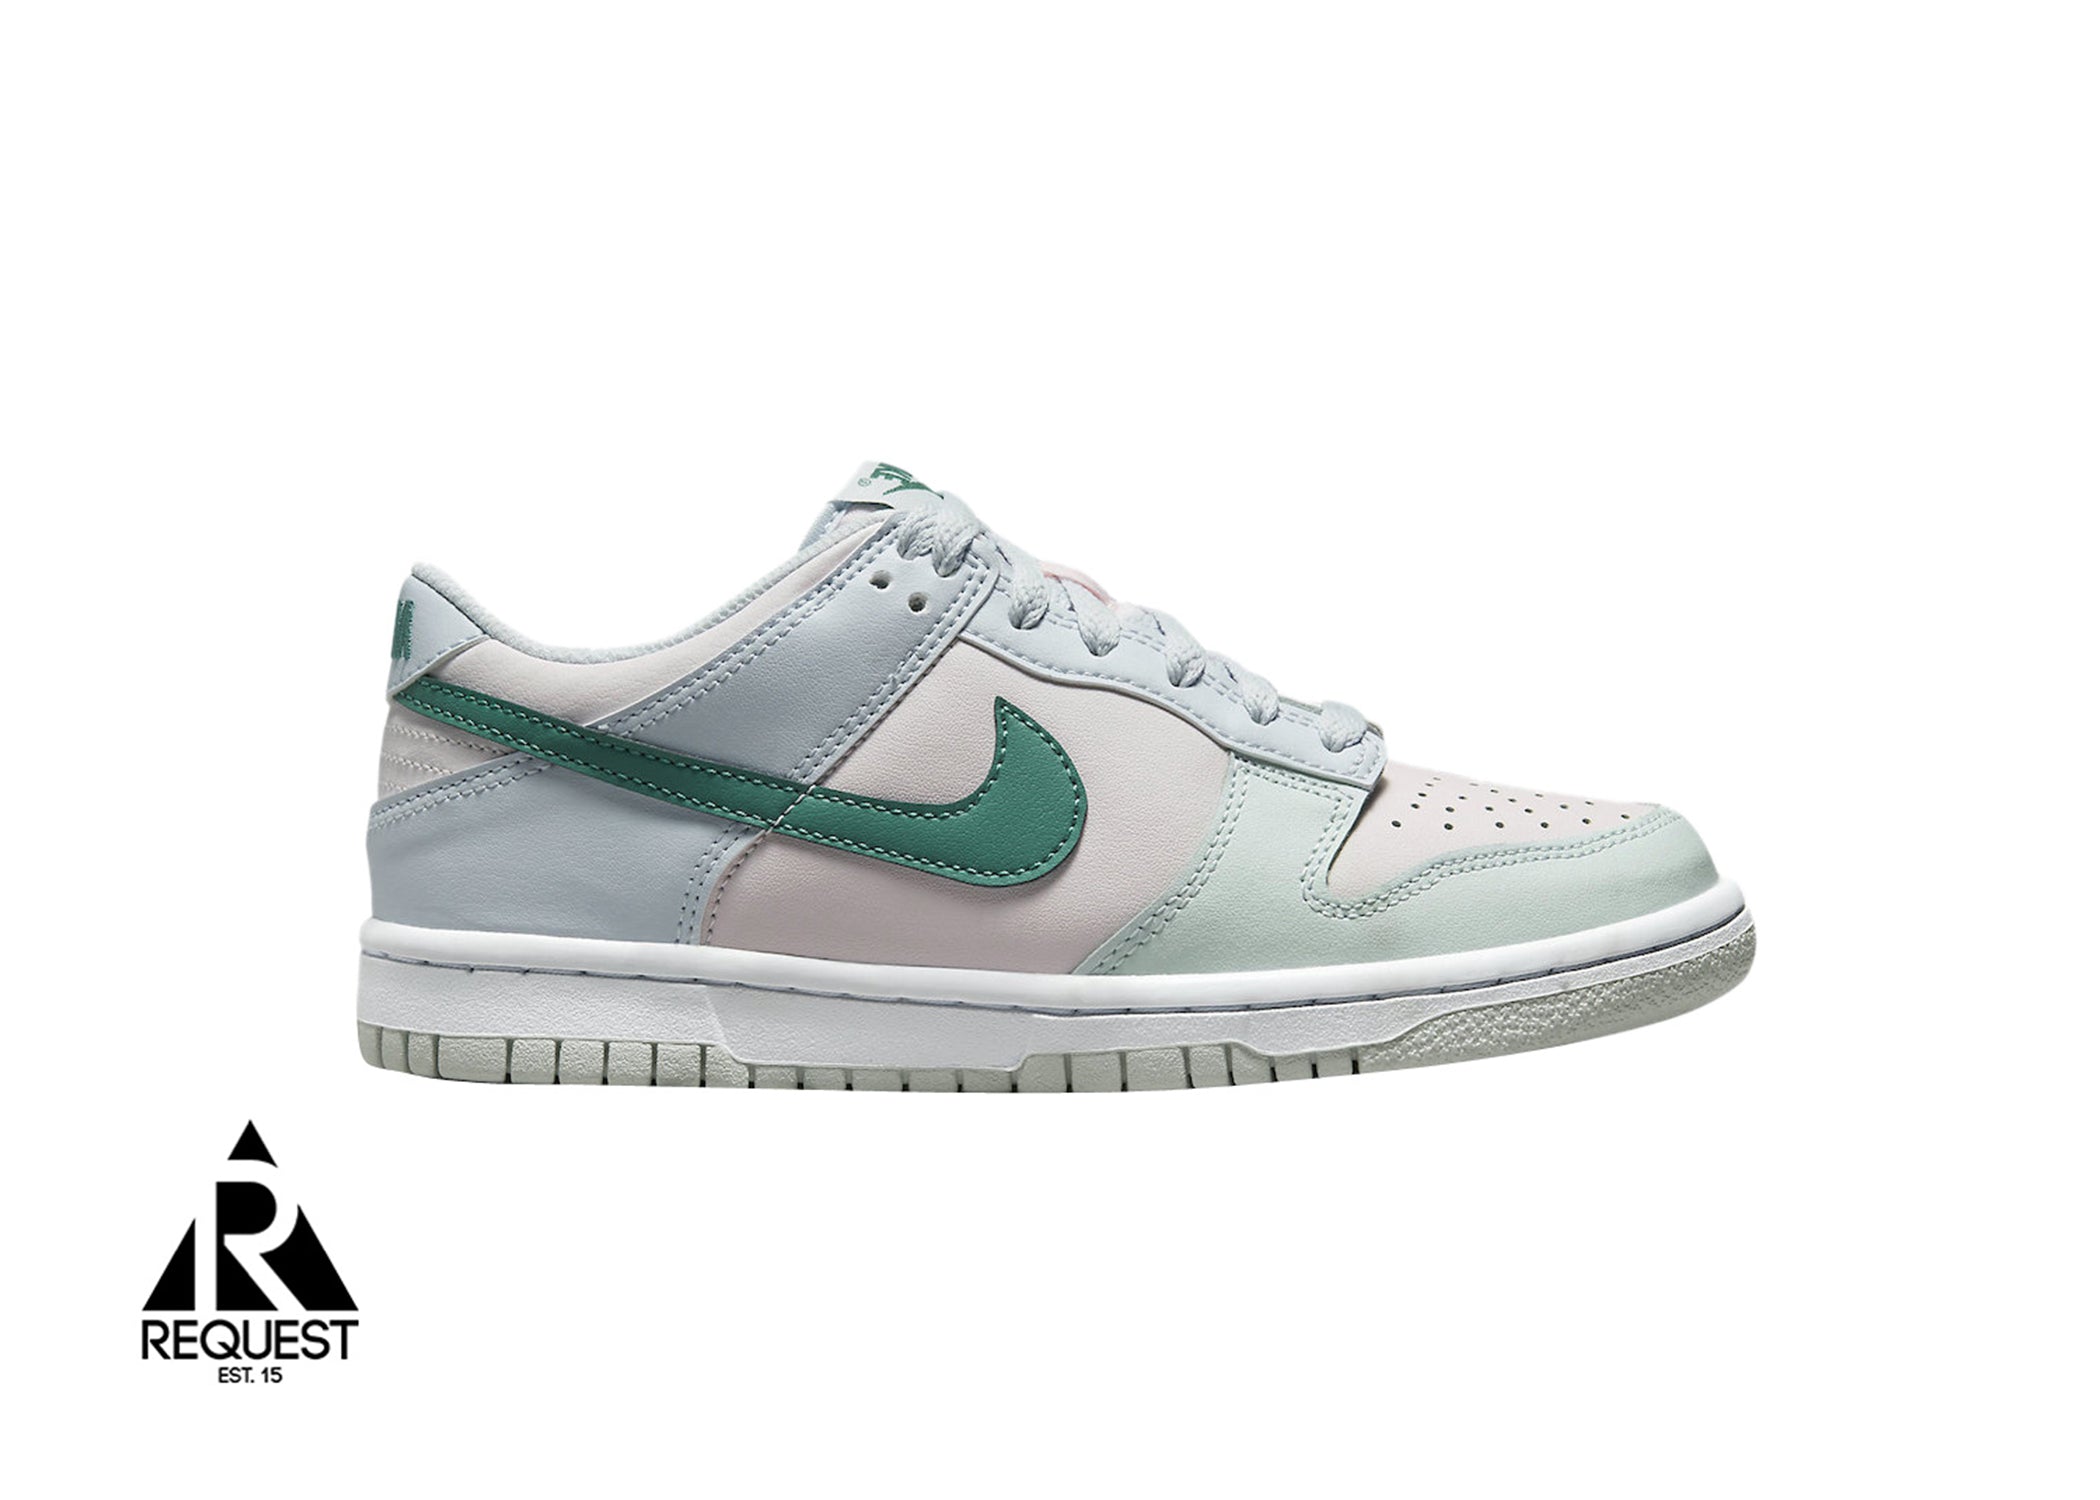 Nike Dunk Low GS "Mineral Teal"